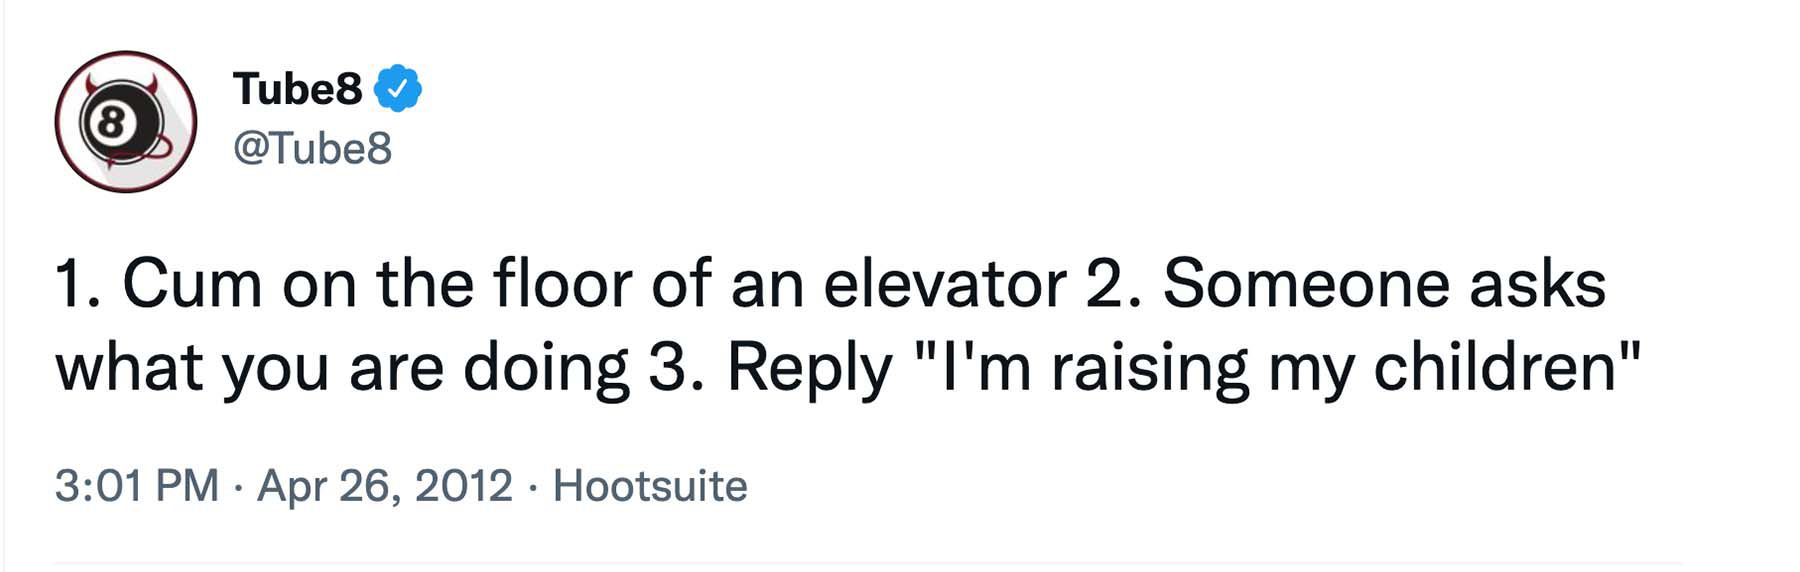 A tweet from Tube8 on April 26, 2012 that says, “1. Cum on the floor of an elevator 2. Someone asks what you are doing 3. Reply “I’m raising my children””